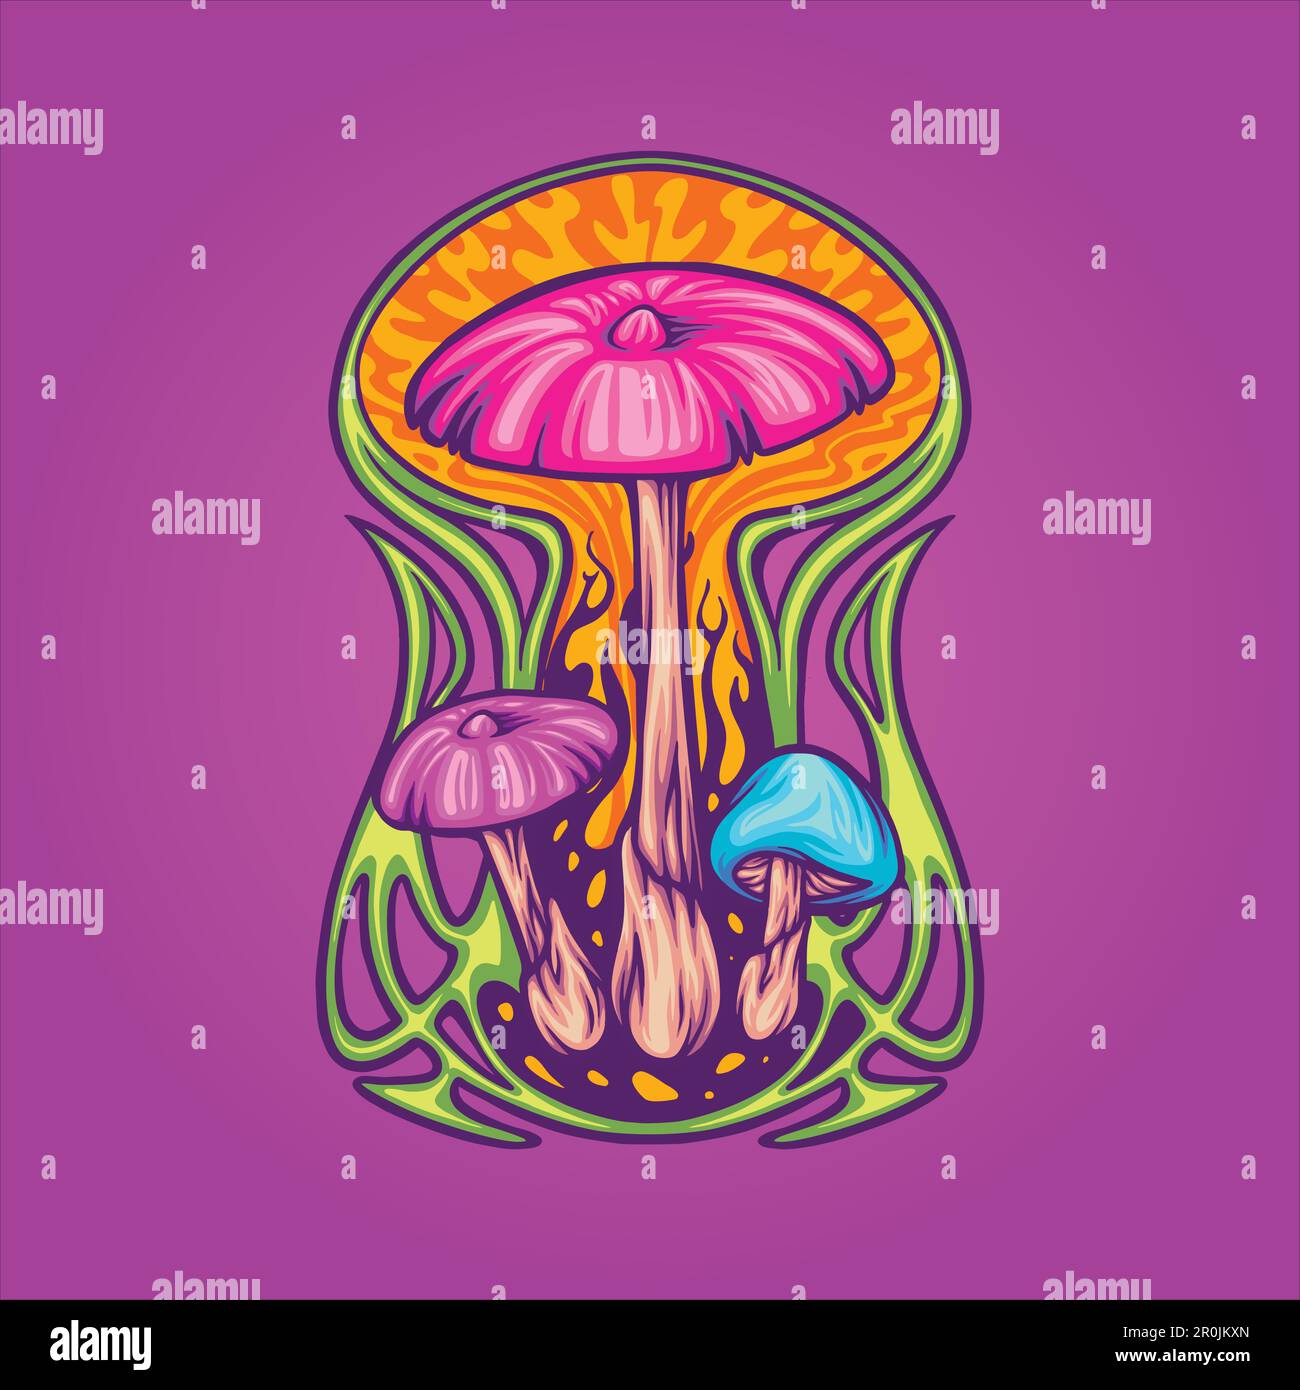 Magic mushroom psycho plant with art nouveau background frame illustrations vector for your work logo, merchandise t-shirt, stickers and label designs Stock Vector